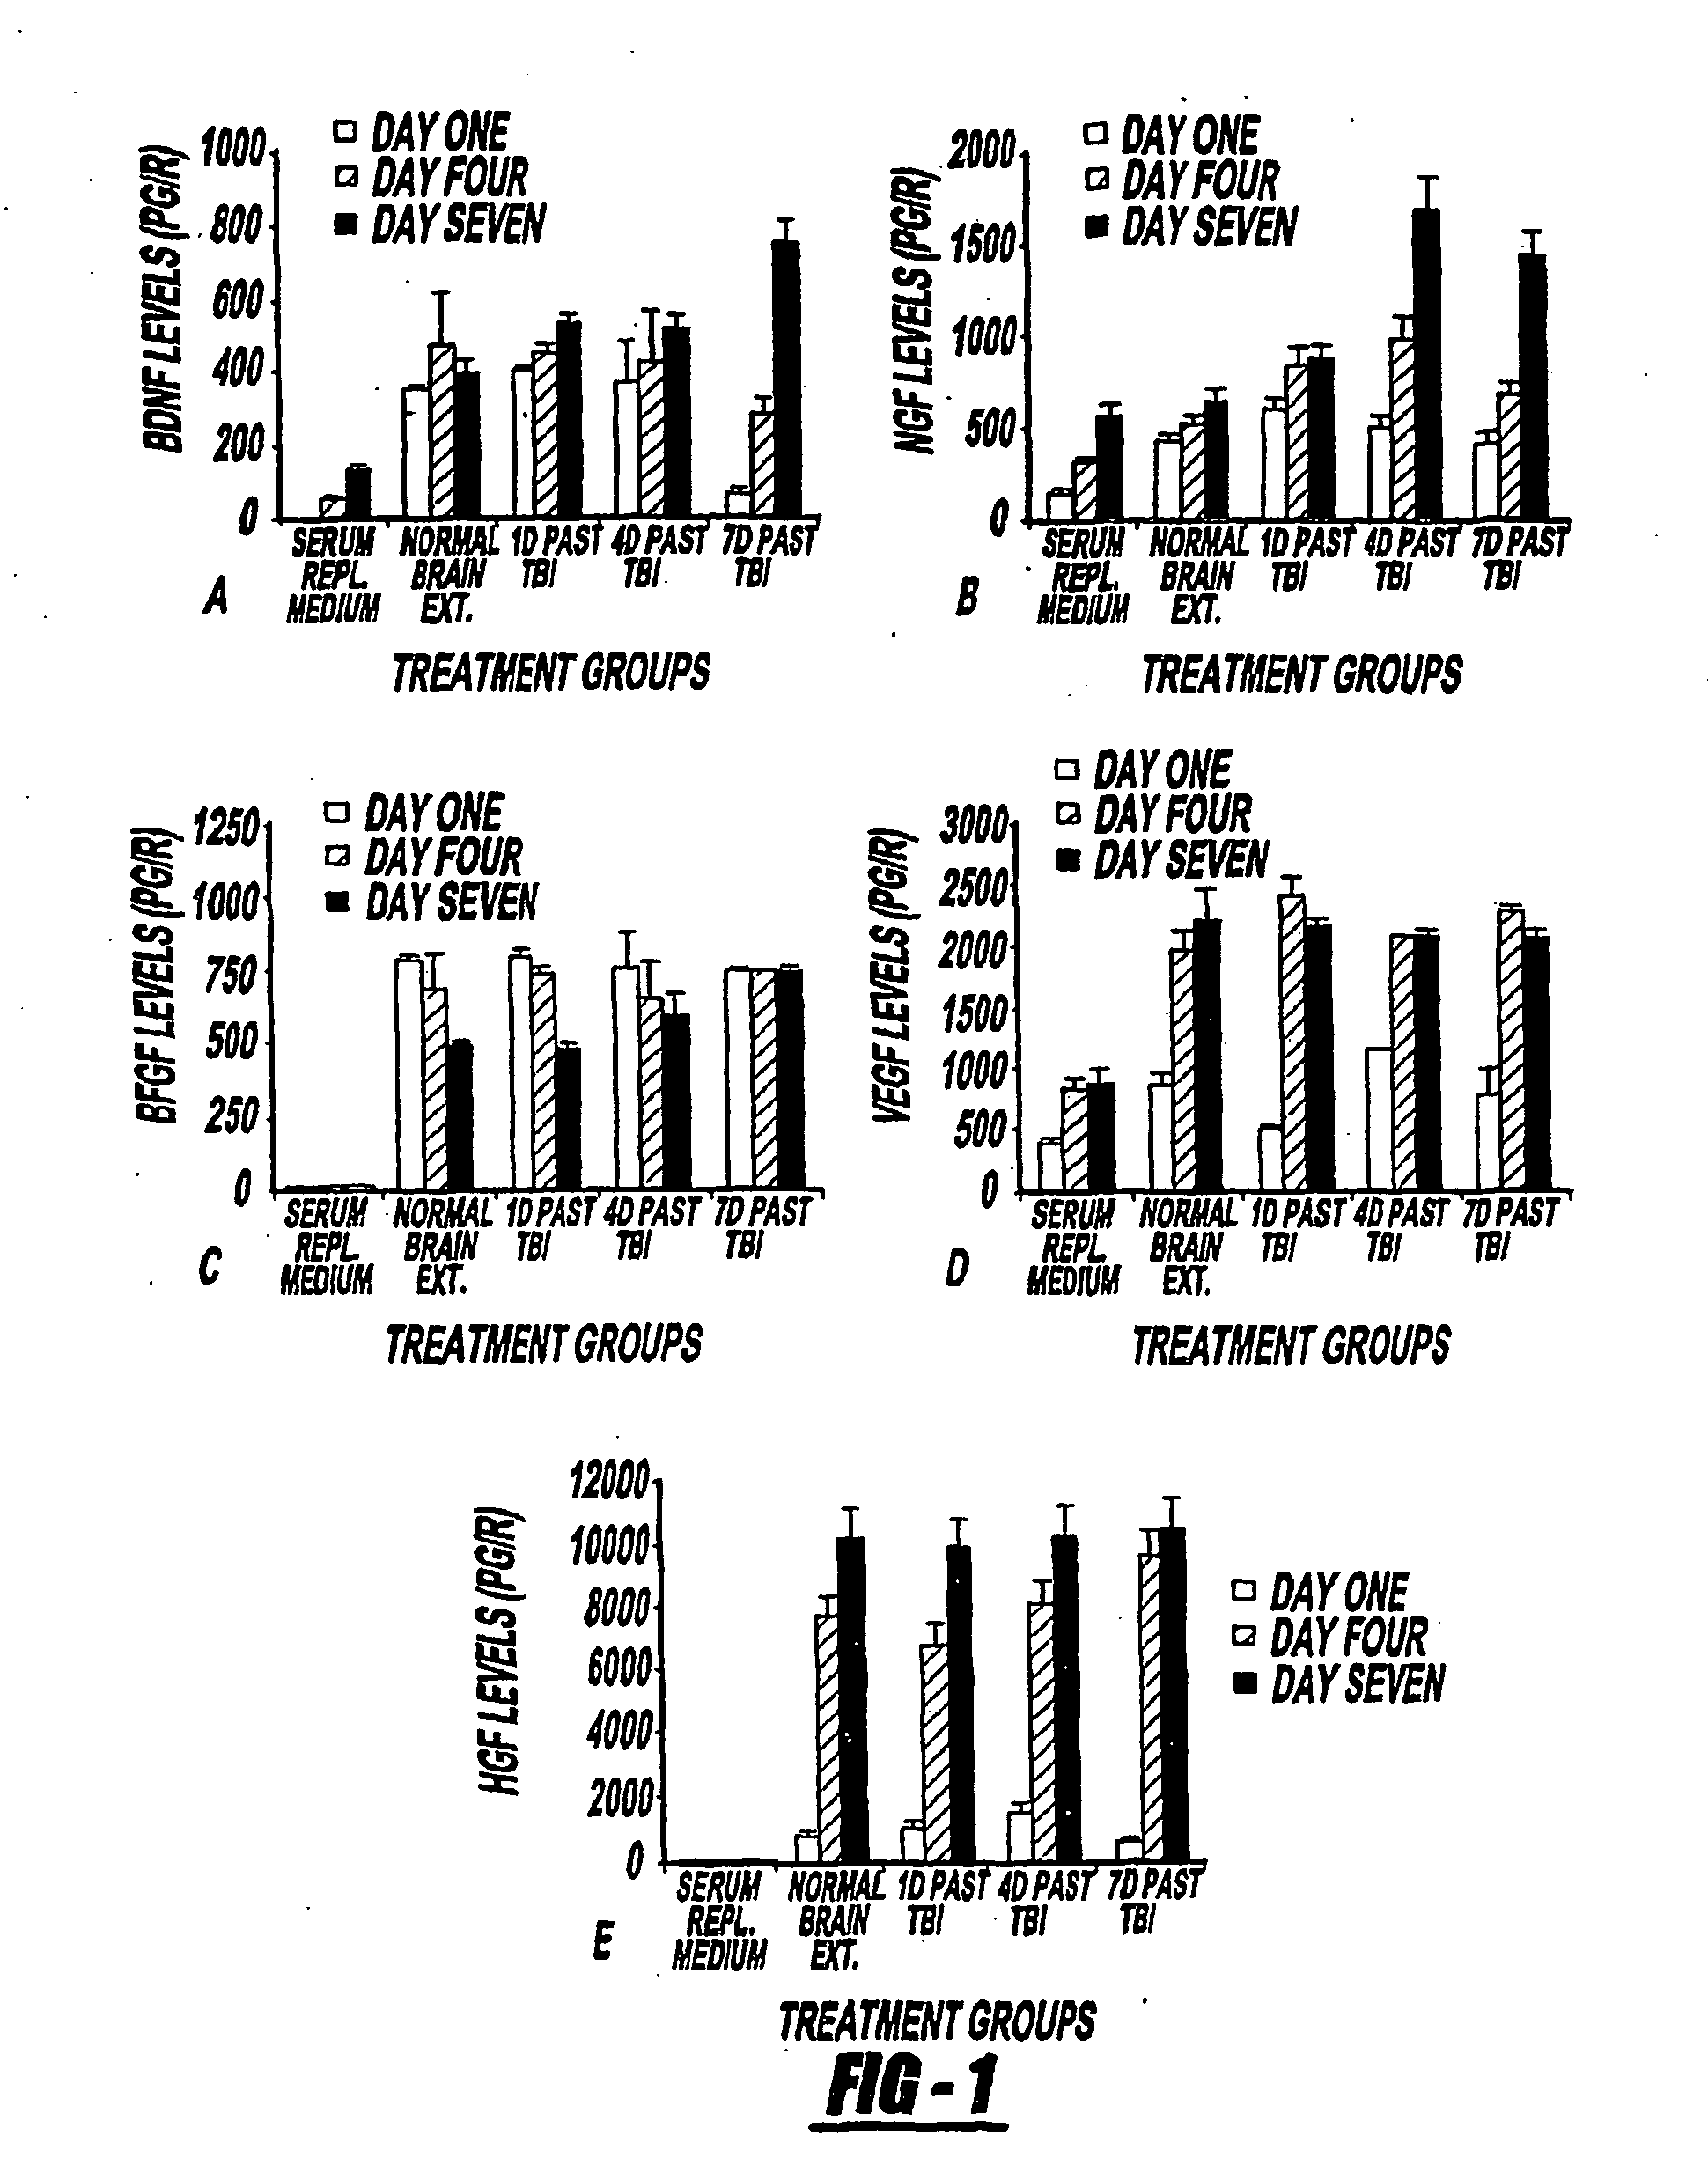 Materials from bone marrow stromal cells for use in forming blood vessels and producing angiogenic and trophic factors